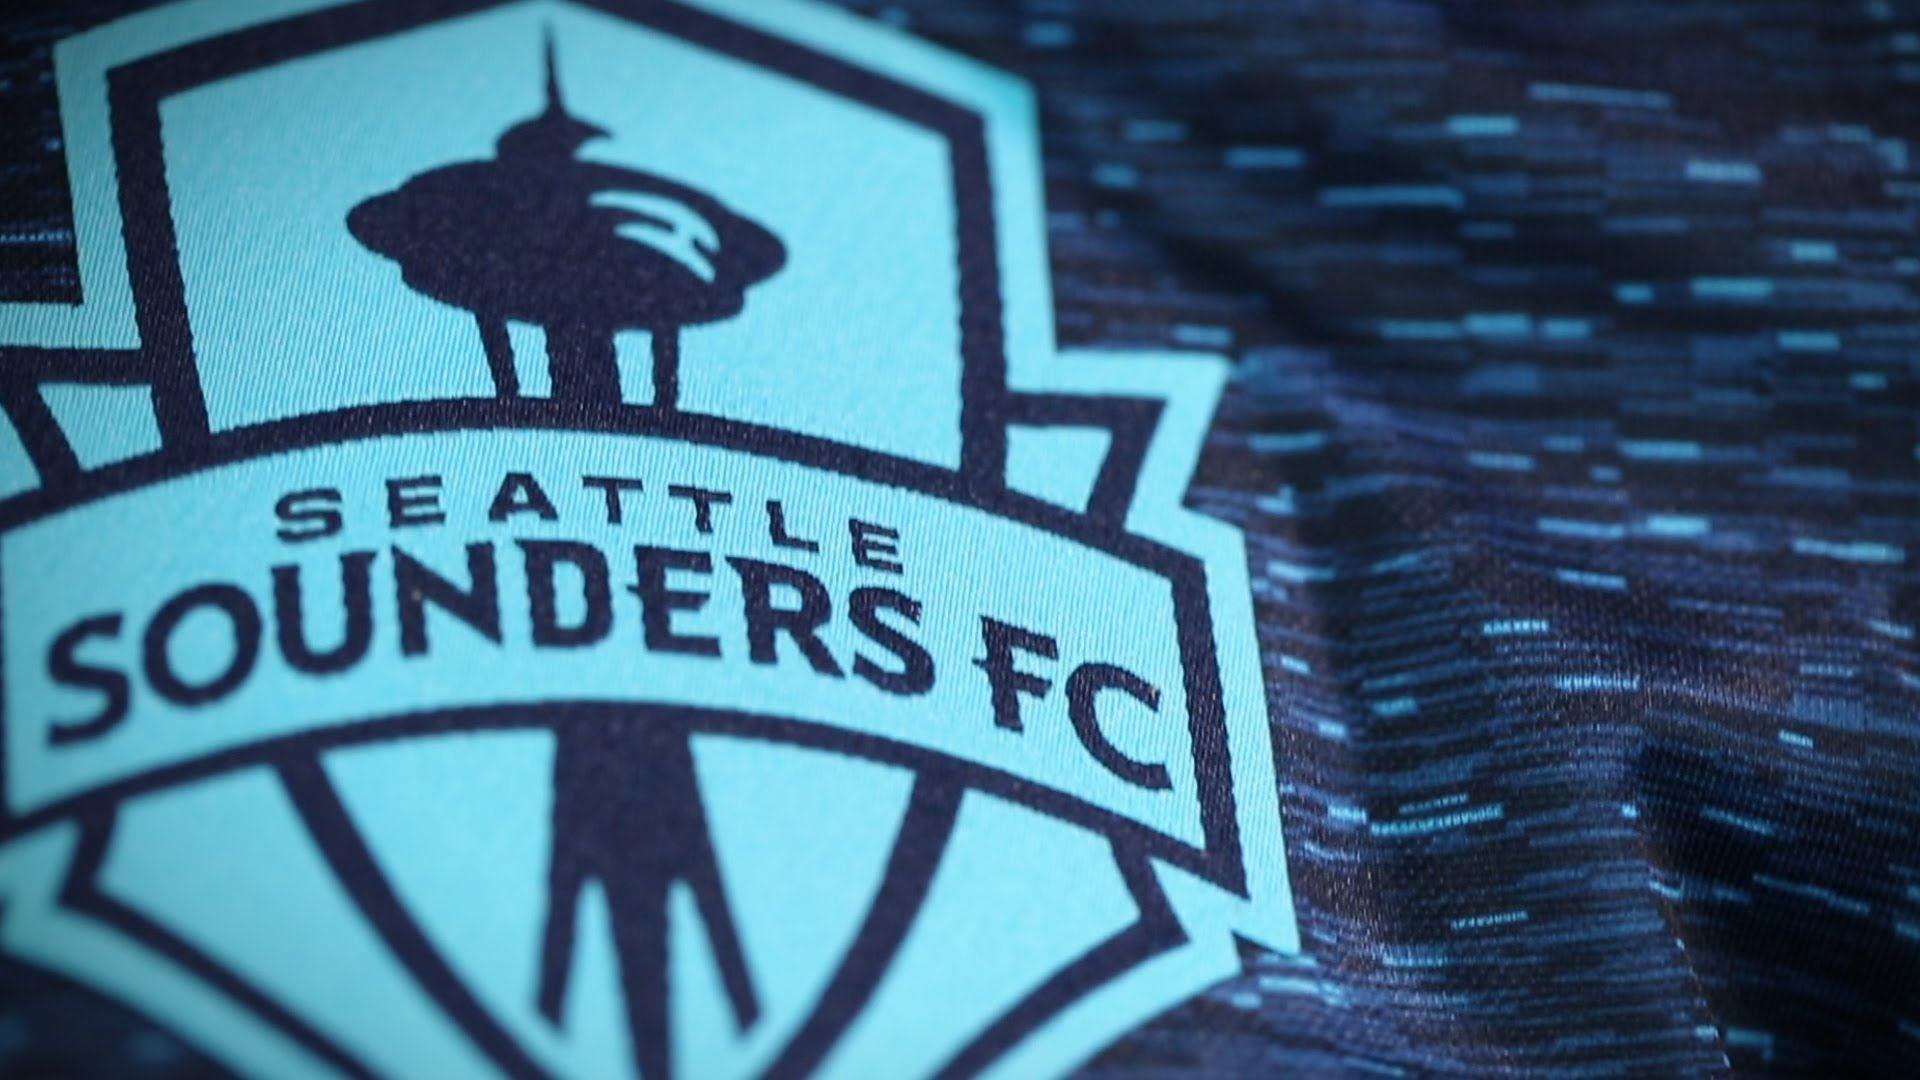 Seattle Sounders FC unveils two new kits for season